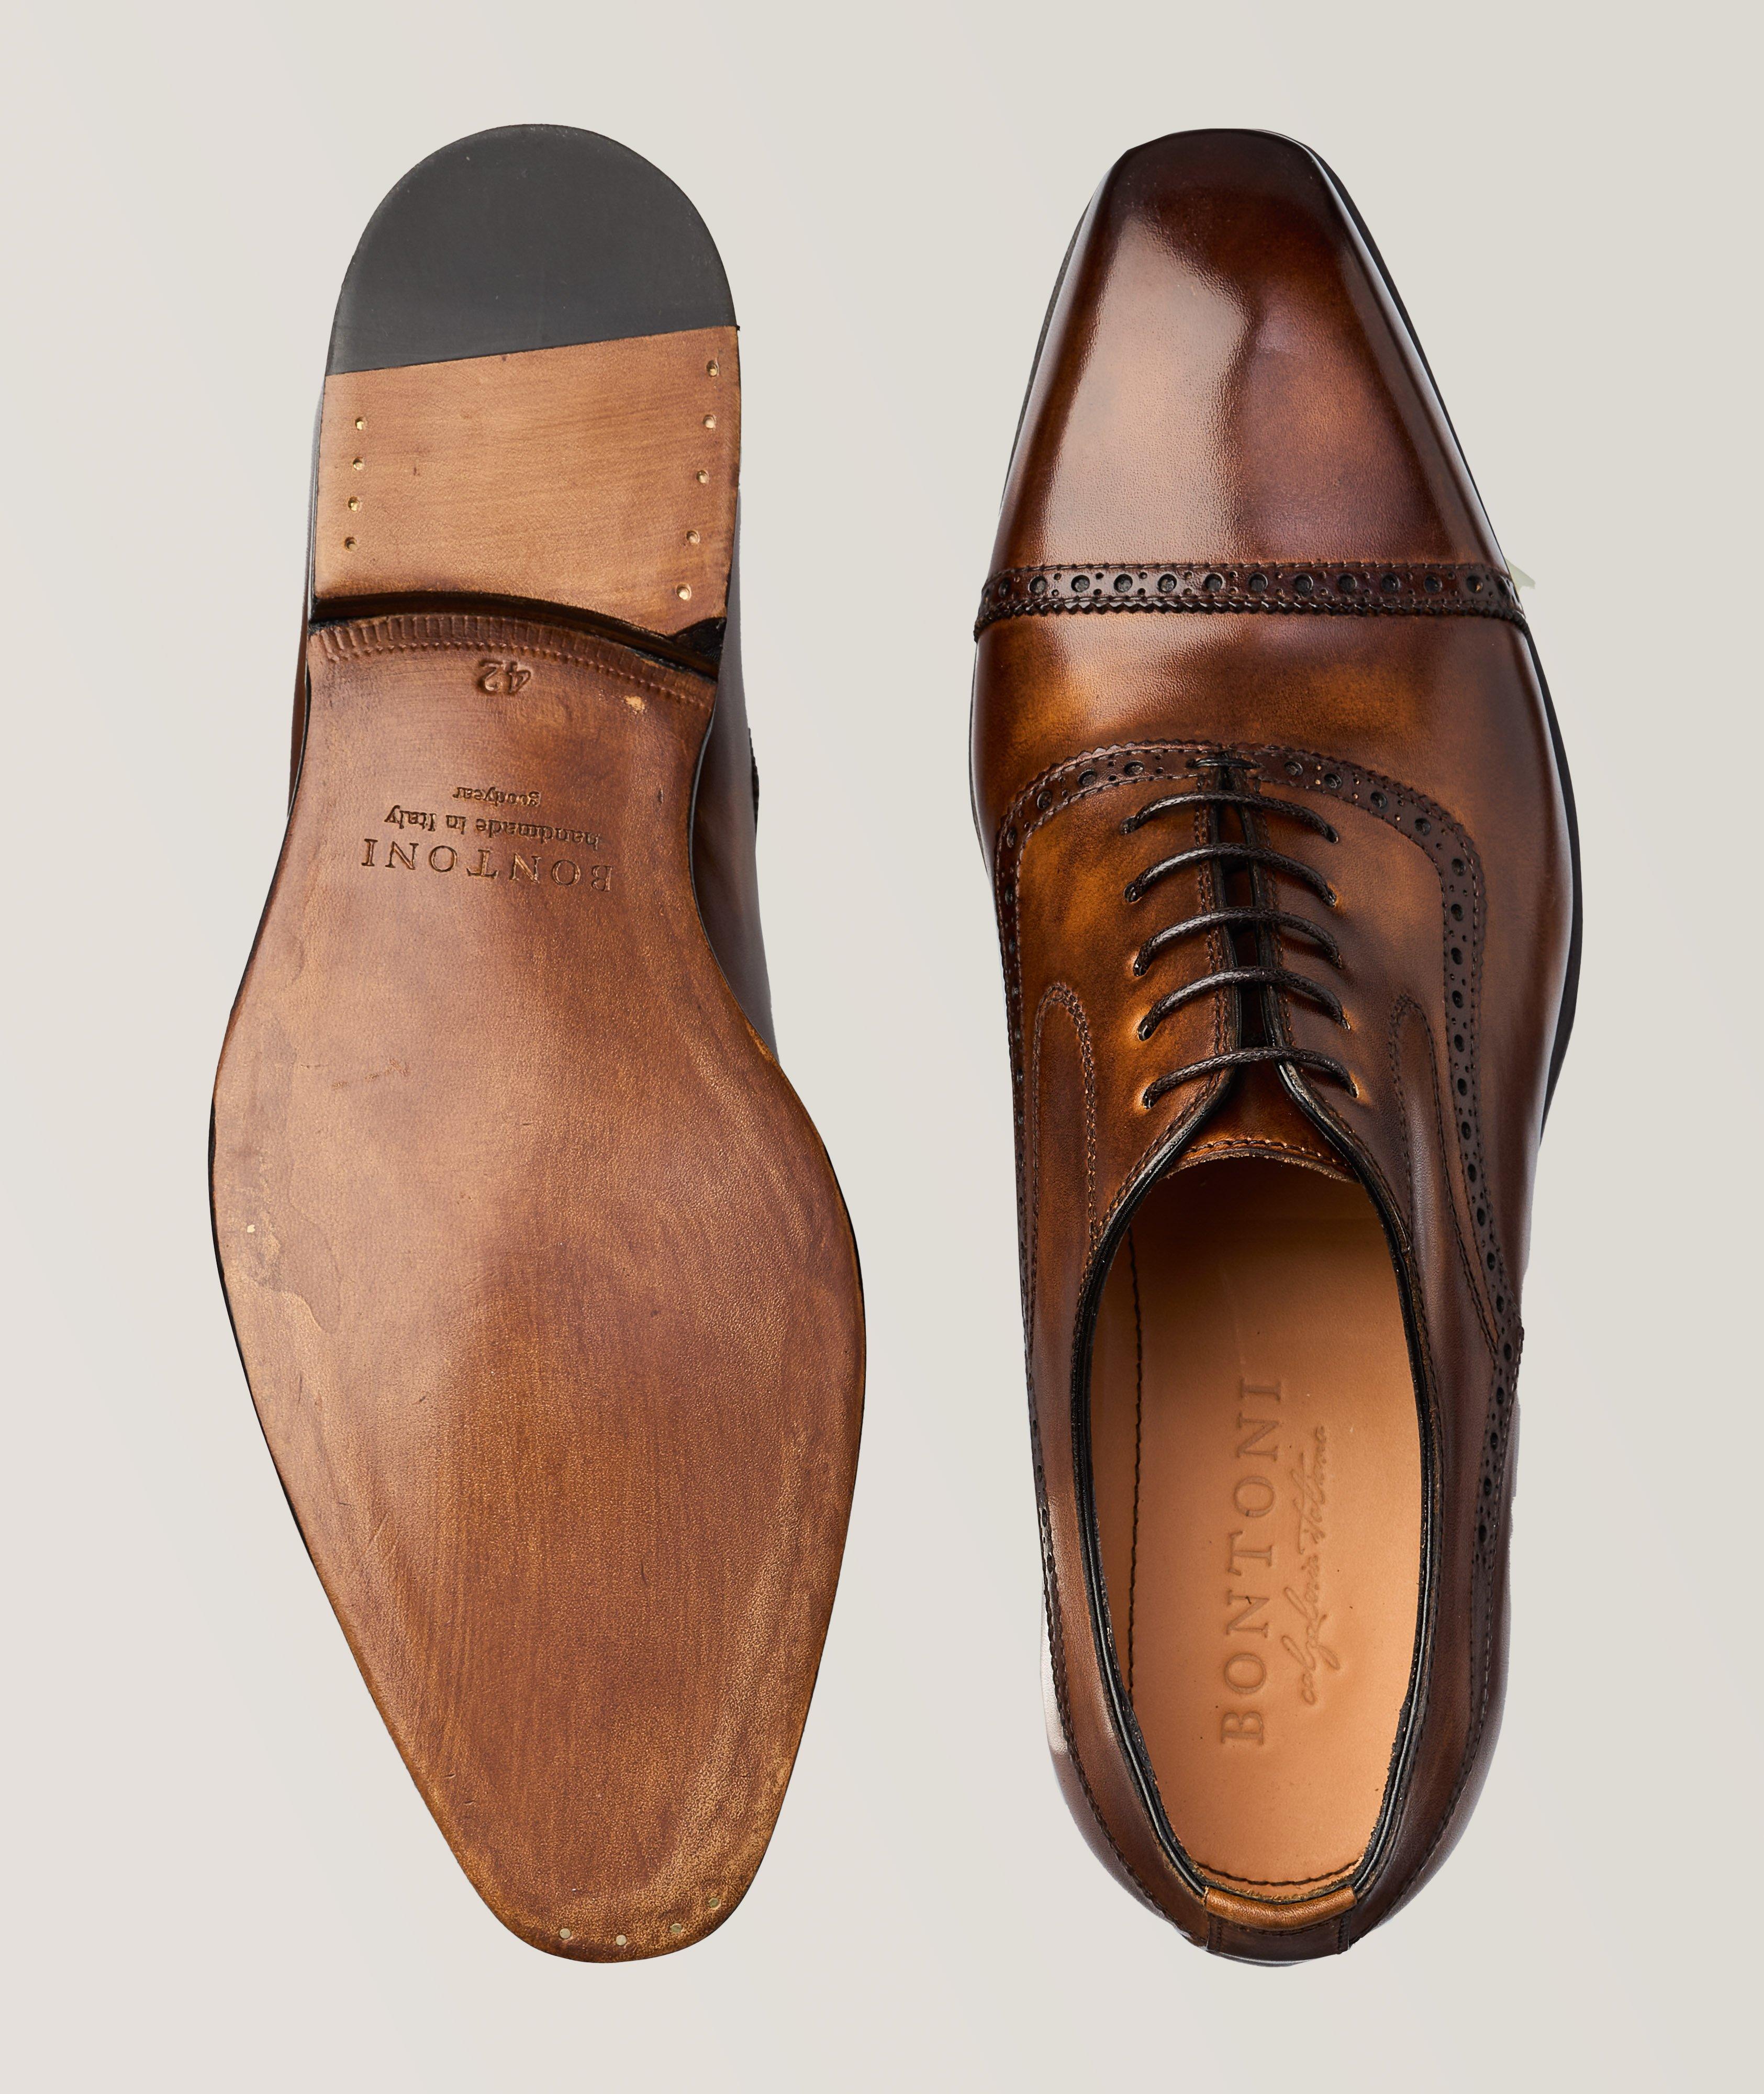 Luciano ll Leather Oxford Captoe  image 2